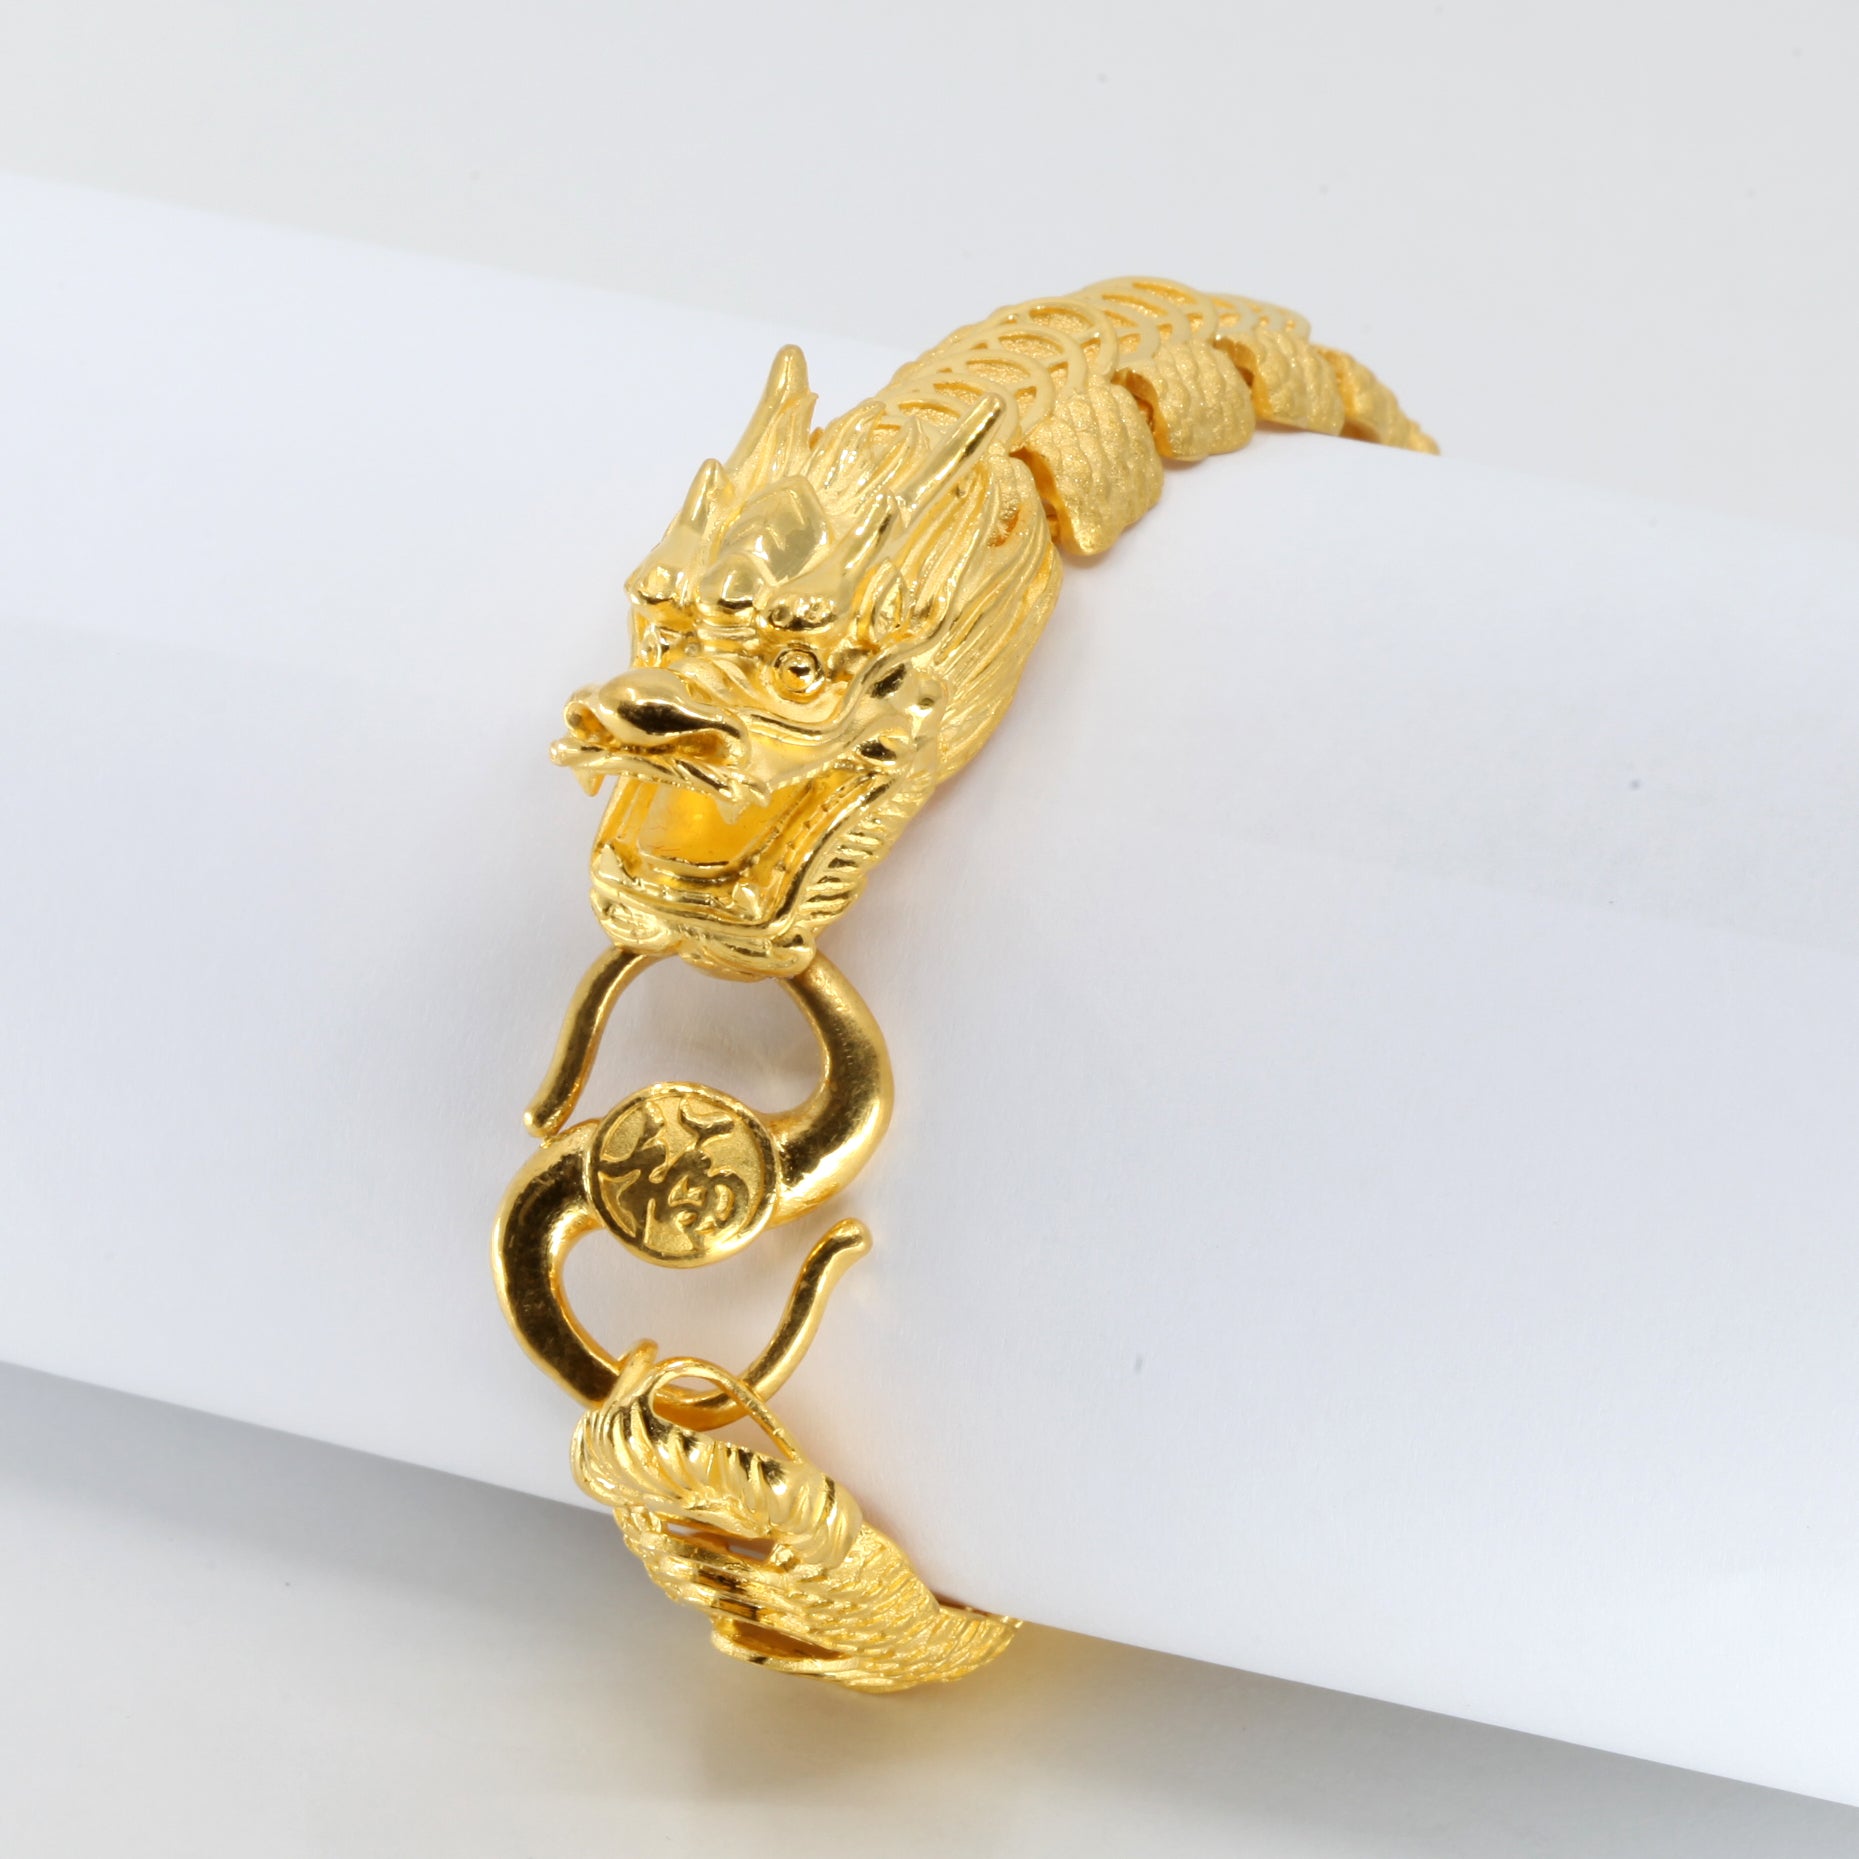 18k Yellow Gold Filled Hip Hop Mens Bracelet With Dragon Head Solid  Handsome Male Gold Filled Jewelry From Blingfashion, $13.81 | DHgate.Com